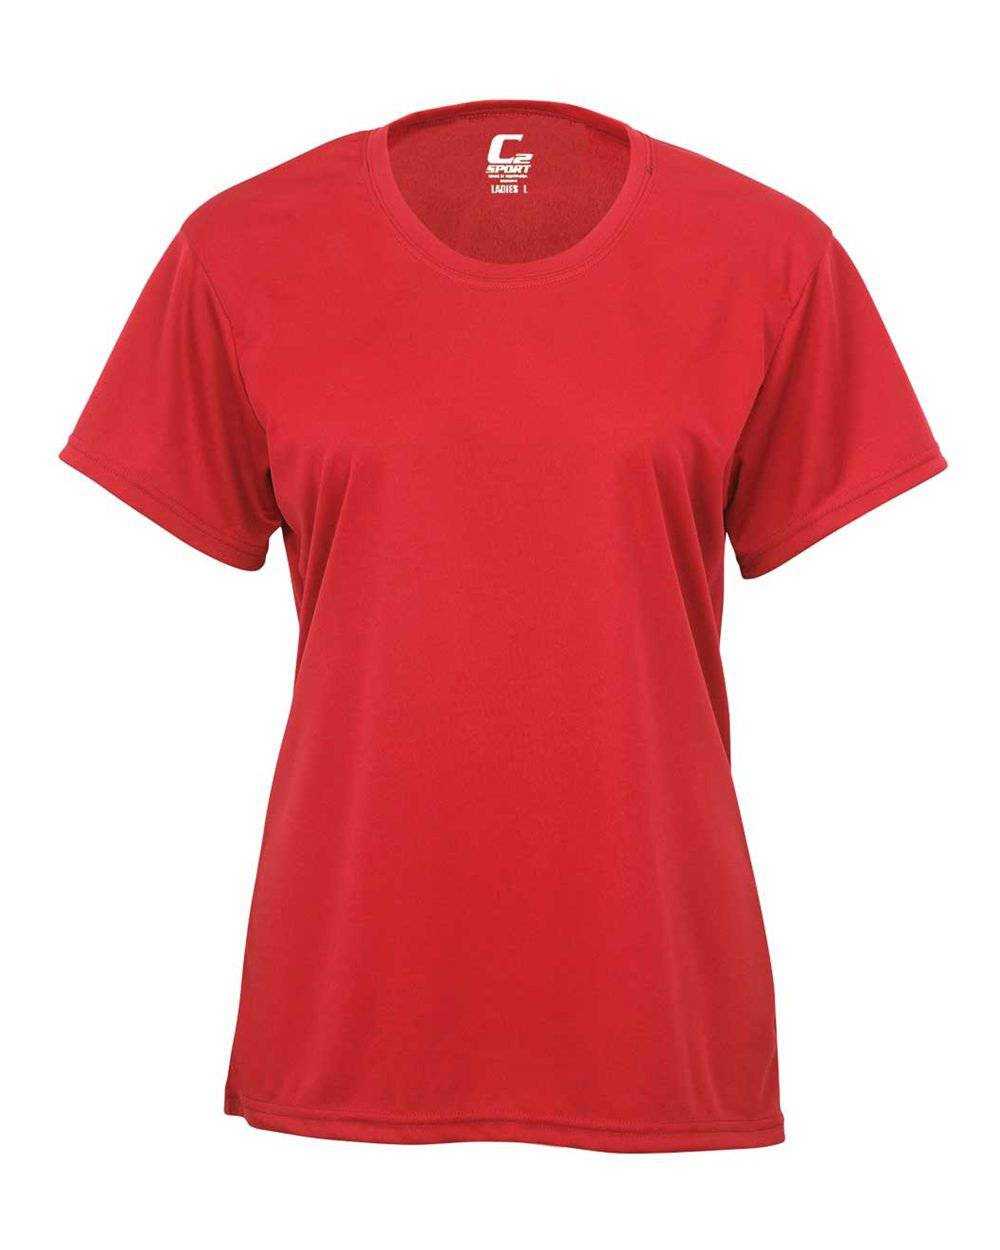 C2 Sport 5600 Ladies Tee - Red - HIT a Double - 1